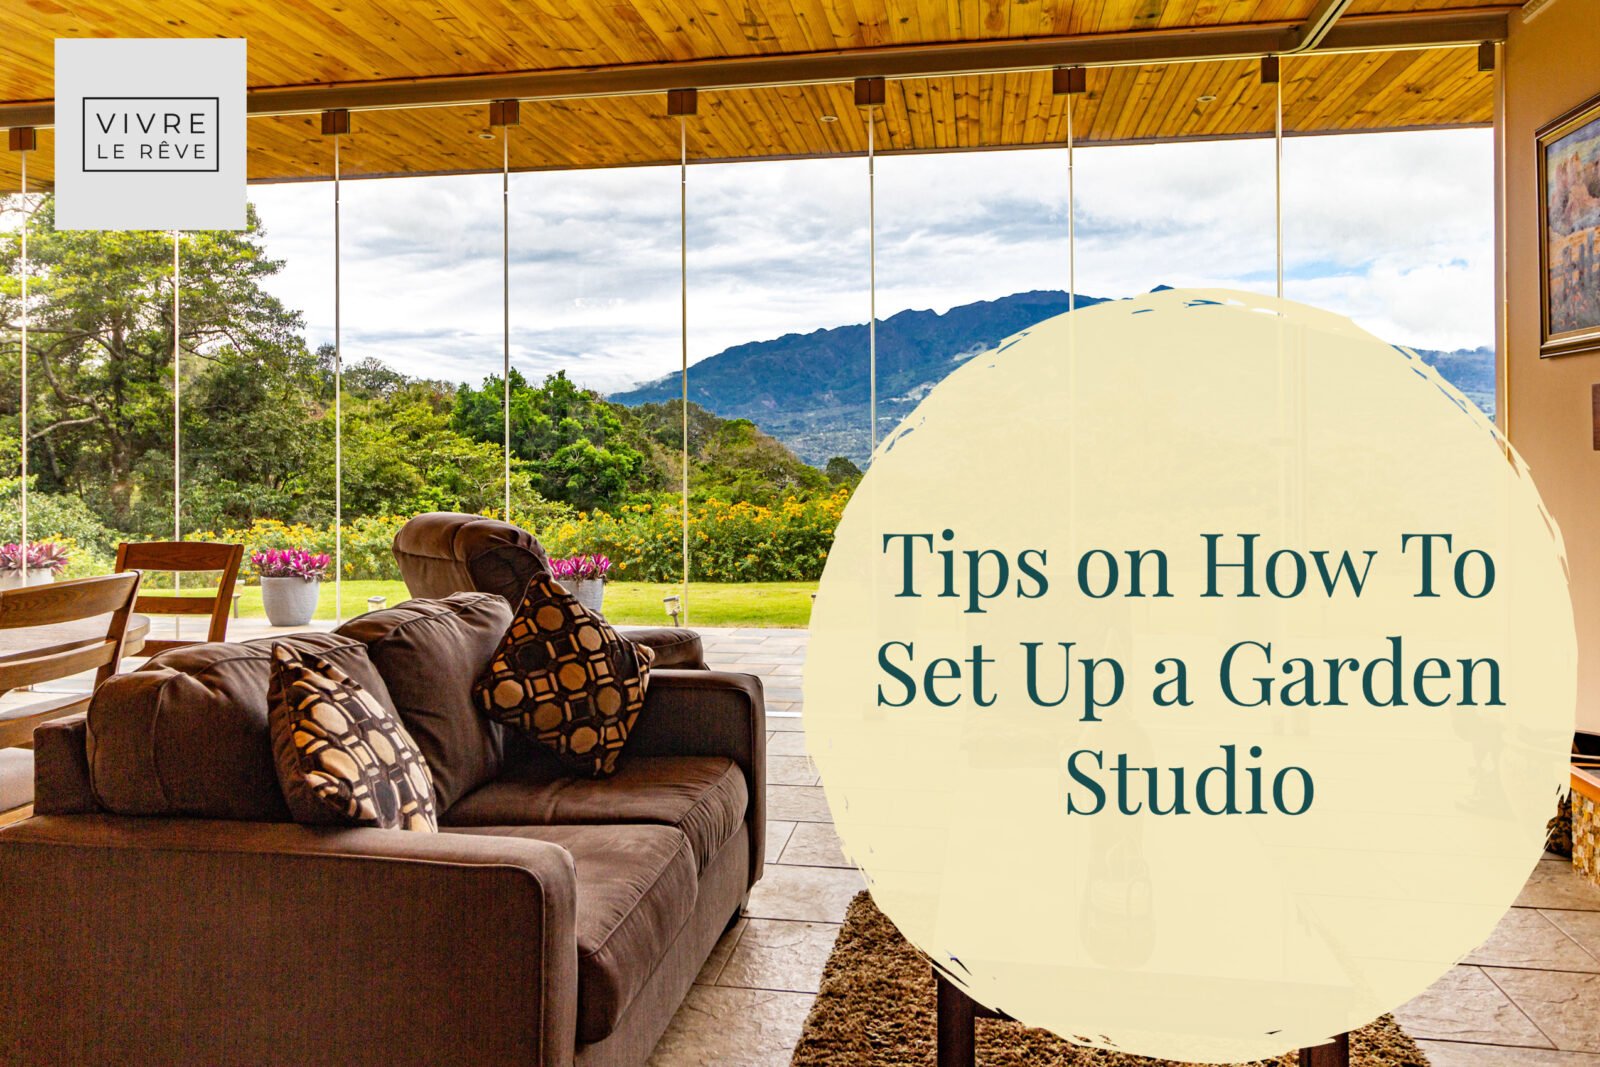 Tips on How To Set Up a Garden Studio